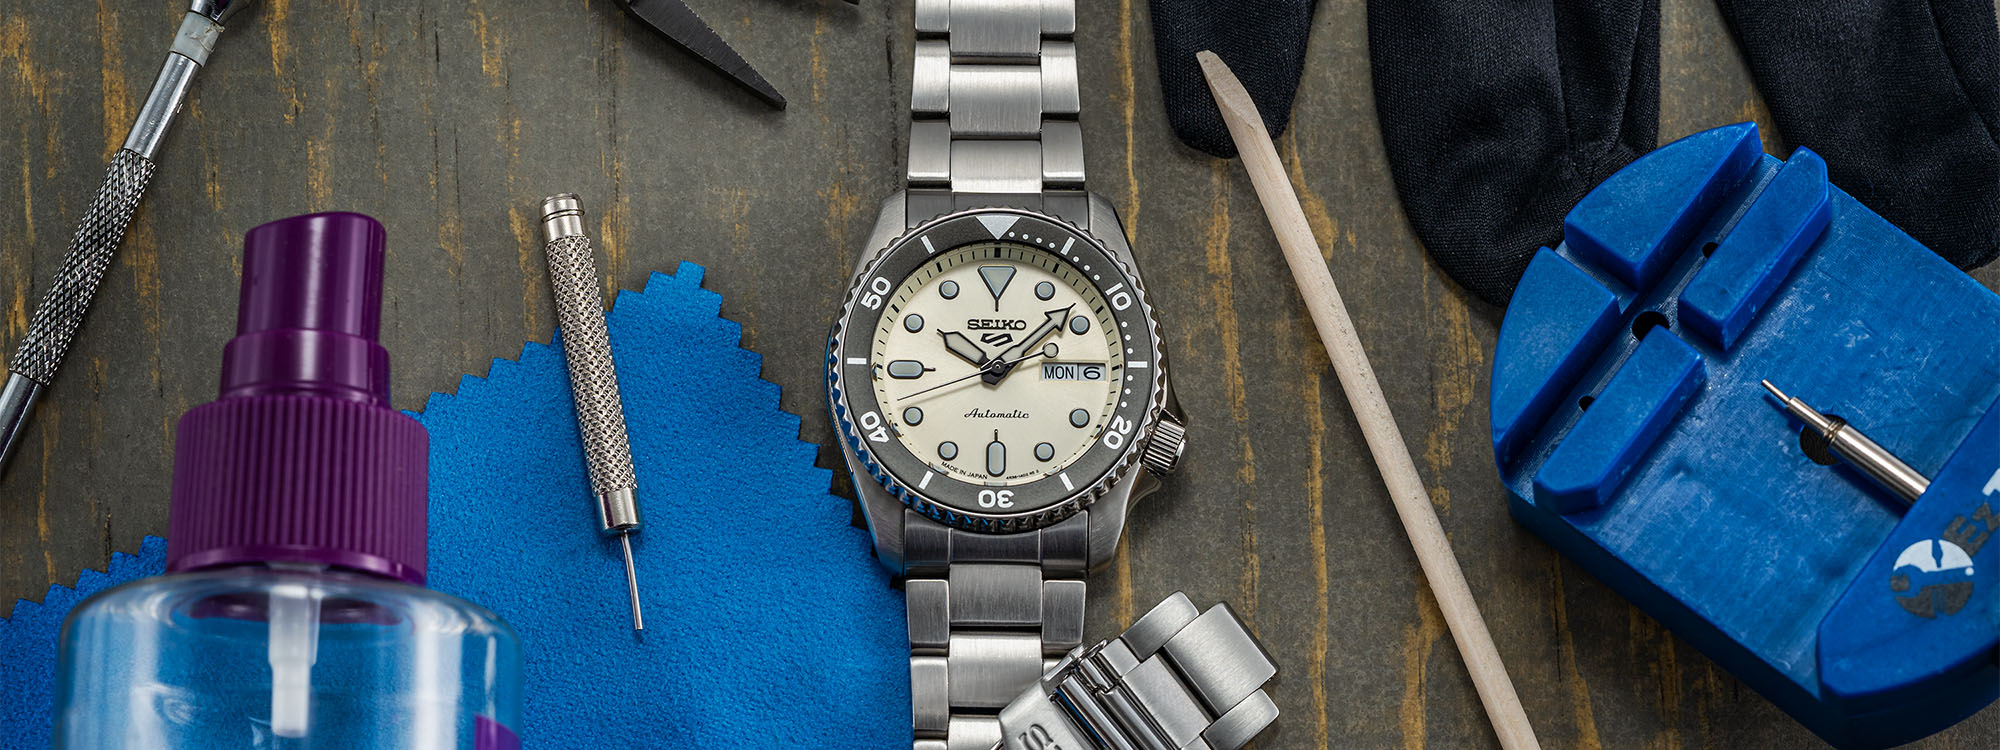 Watch Cleaning 101: How to Keep Your Watch Looking Sharp Between